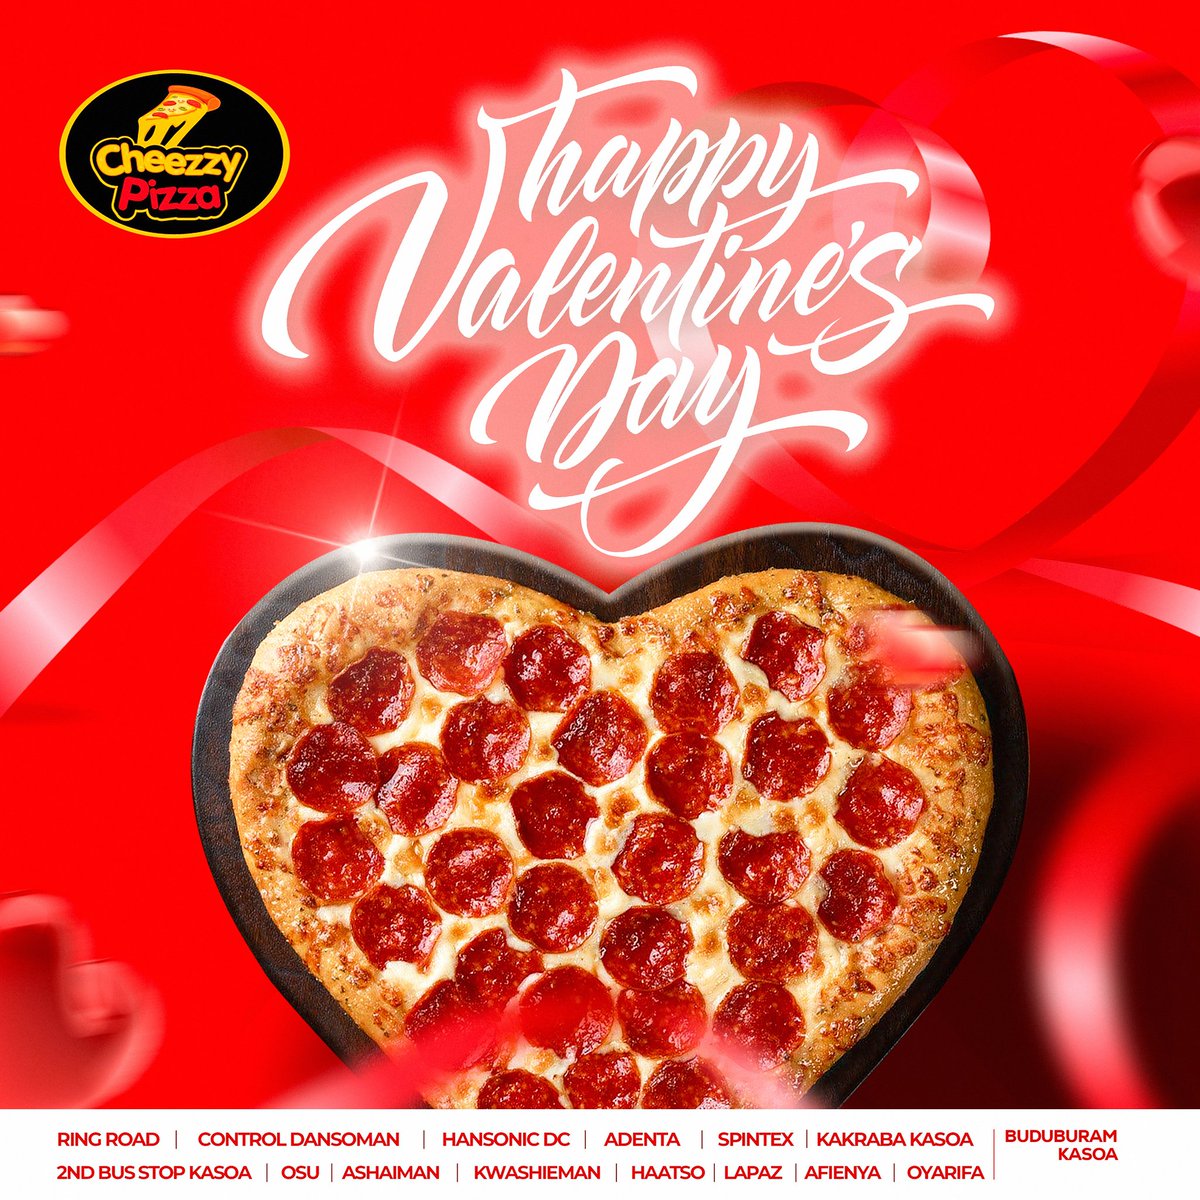 Happy Valentine's Day ❤️. Cheezzy loves you We are available to for dine in, pick up and delivery. Call us on 0544 133 397 to order